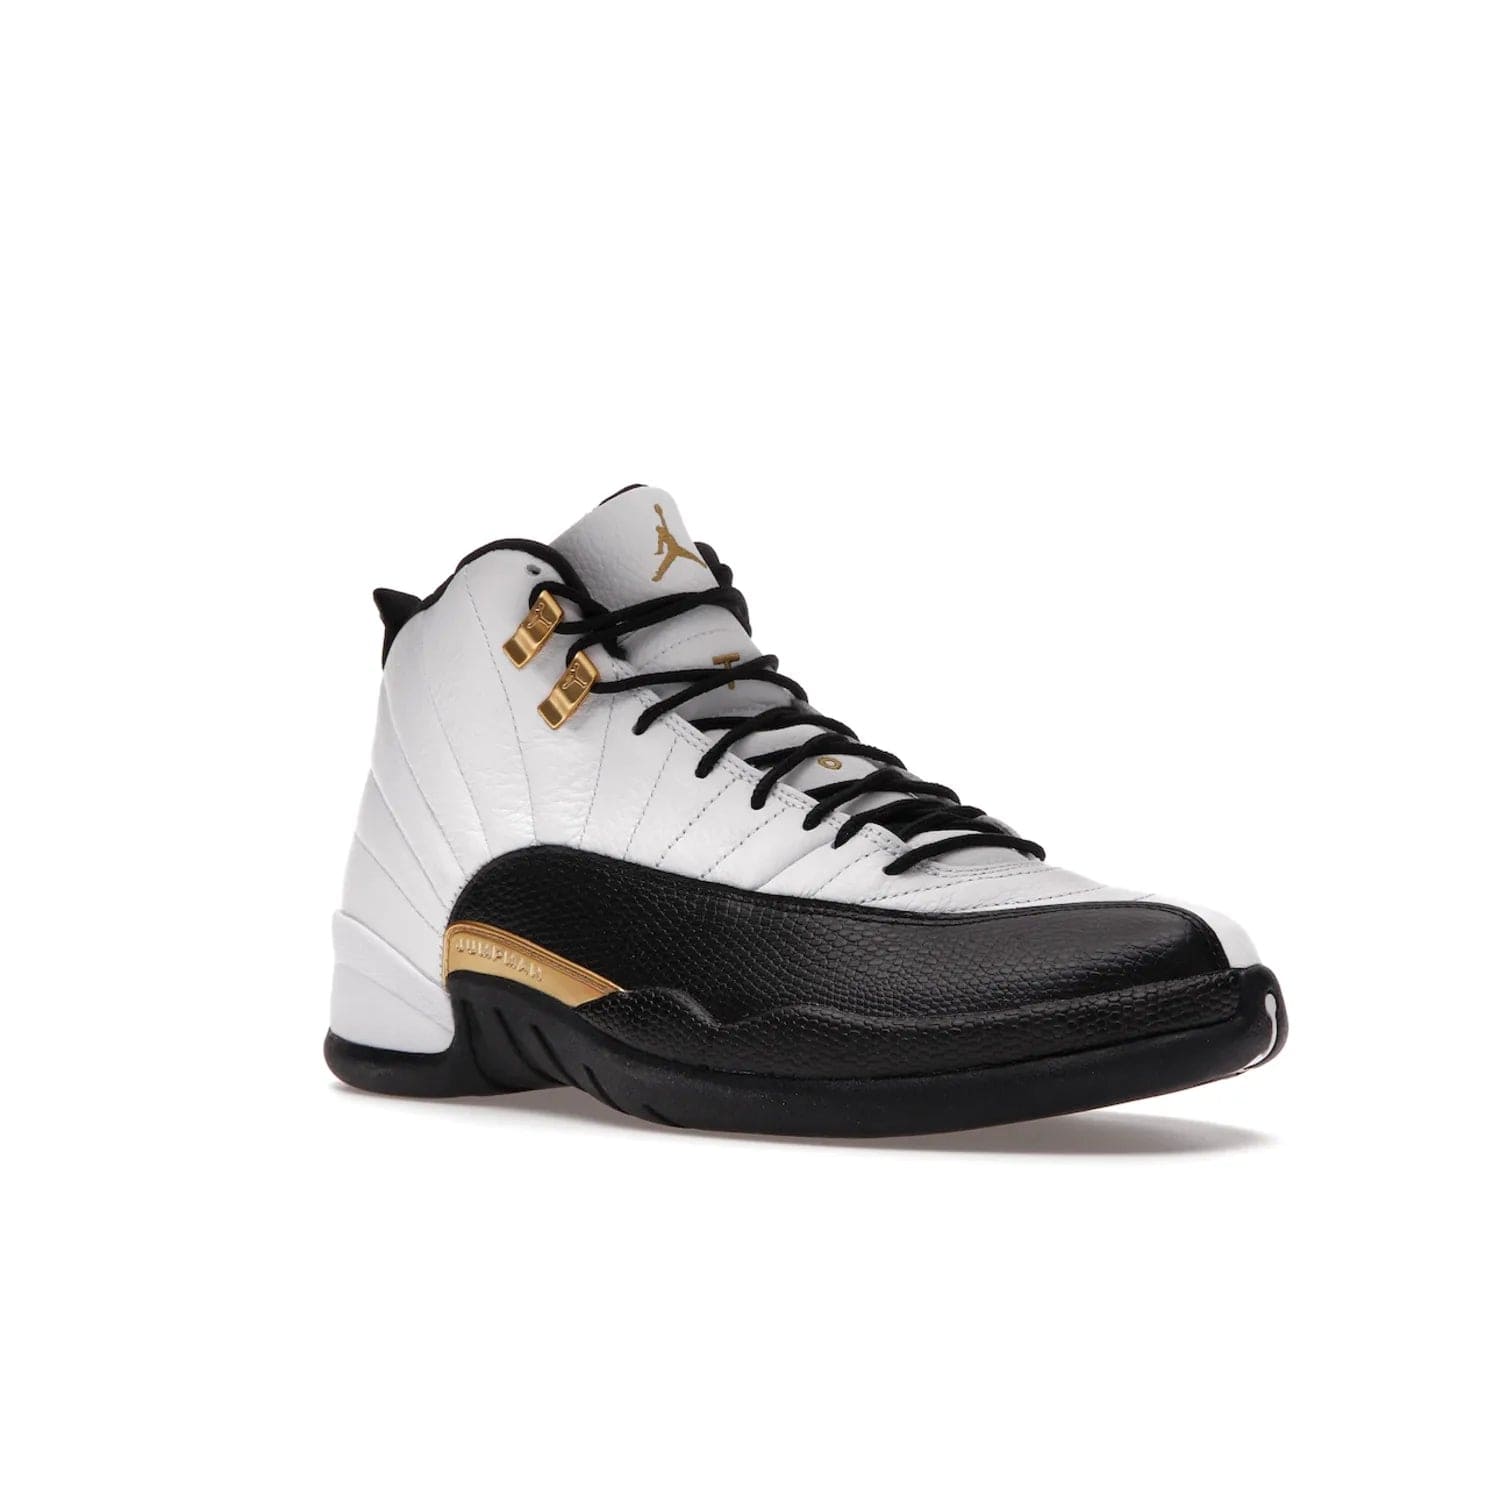 Jordan 12 Retro Royalty Taxi - Image 5 - Only at www.BallersClubKickz.com - Make a statement with the Air Jordan 12 Retro Royalty Taxi. Woven heel tag, gold plaquet, white tumbled leather upper plus a black toe wrap, make this modern take on the classic a must-have. Available in November 2021.